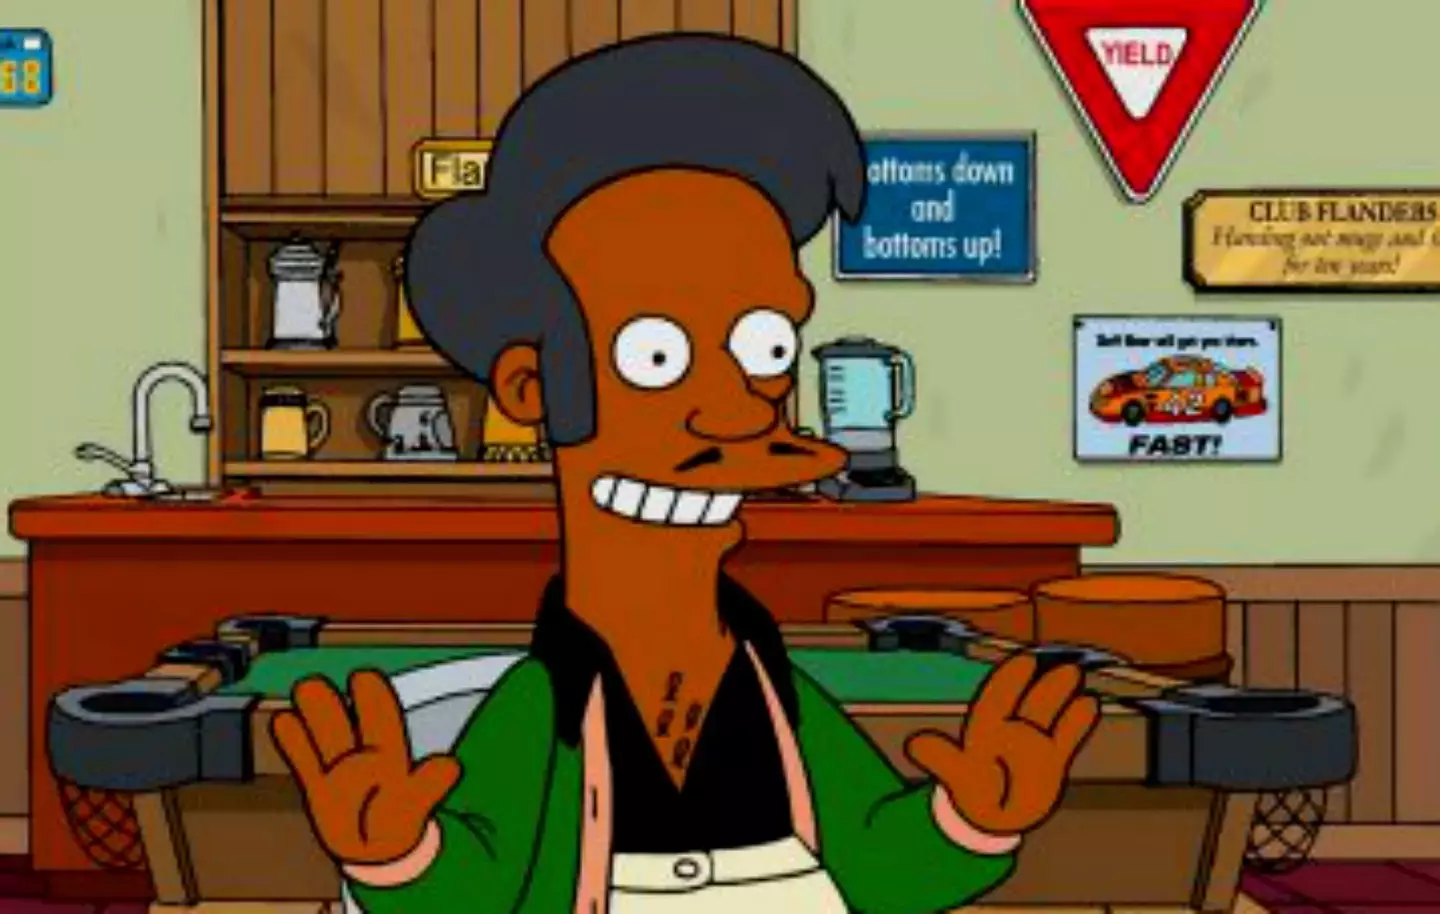 Apu first appeared in The Simpsons in 1990.